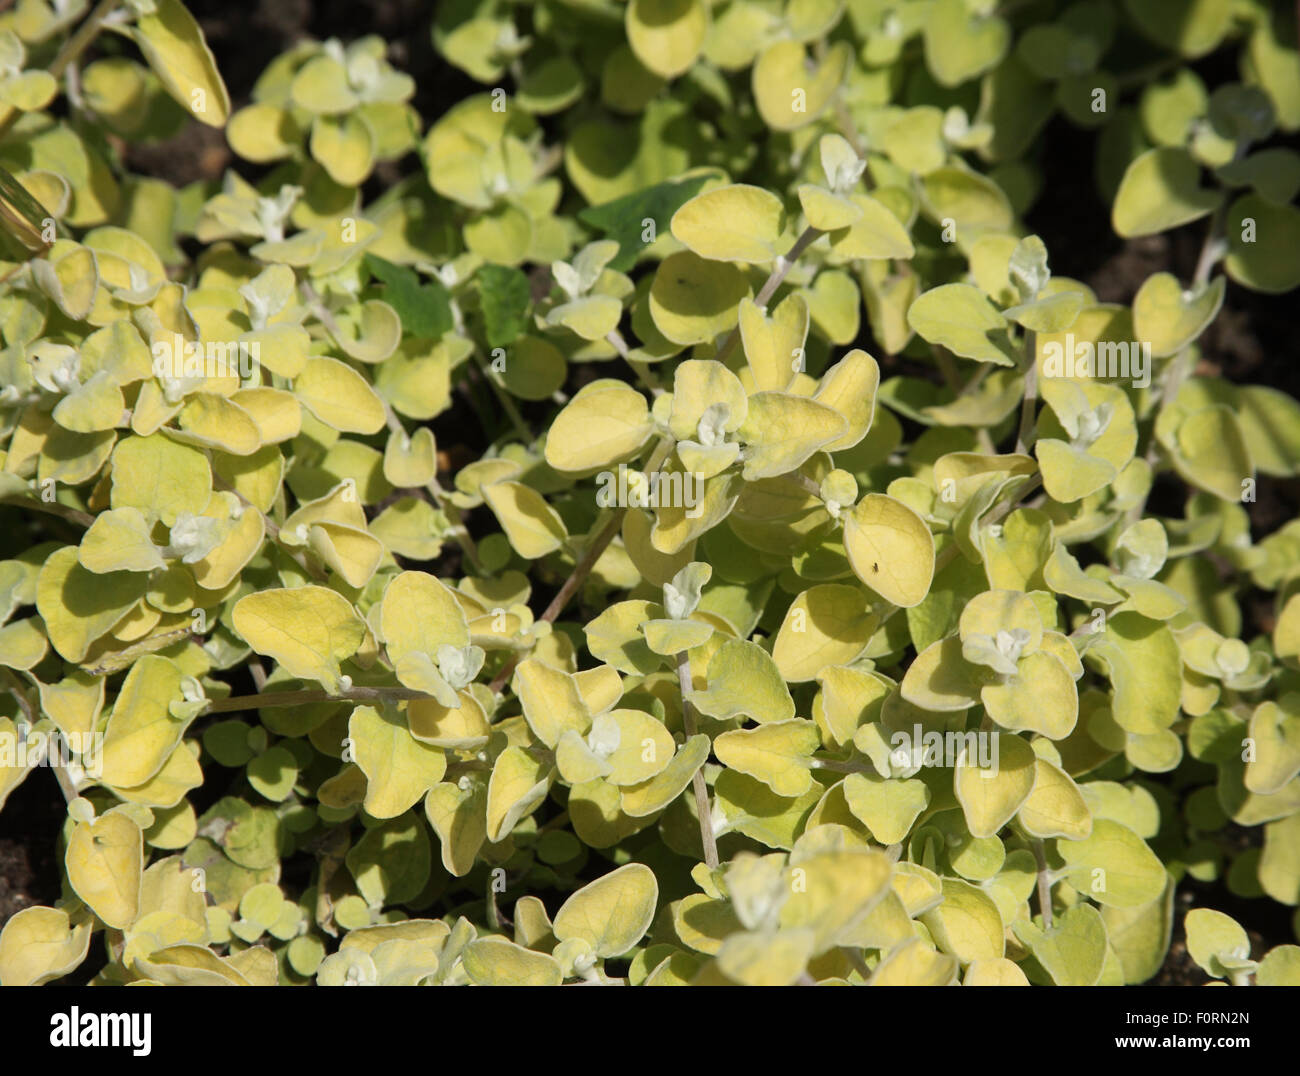 Helichrysum petiolare 'Limelight' close up of plant Stock Photo